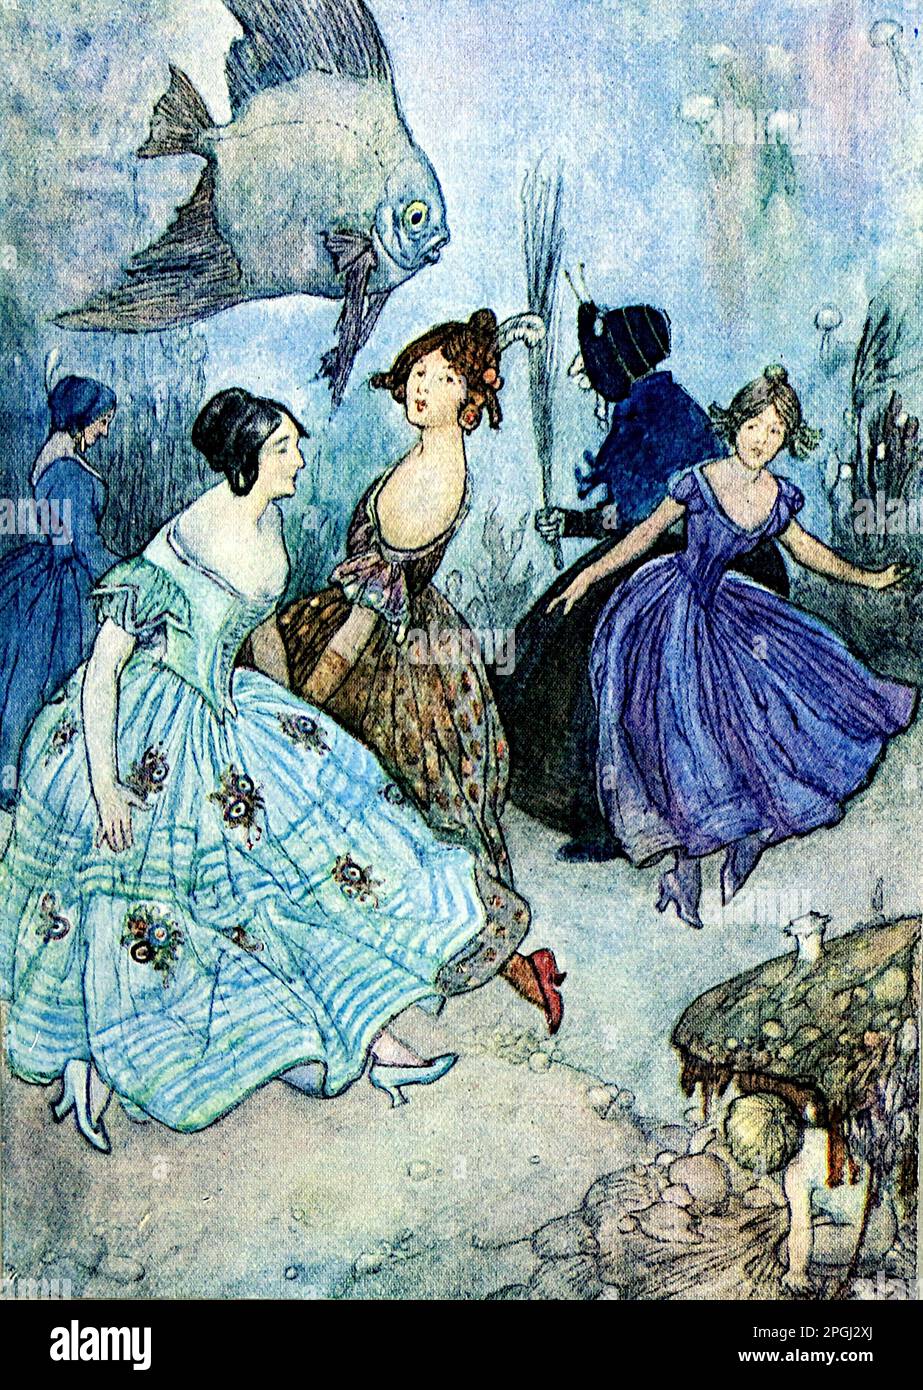 Dancing in Dreadfully Tight Shoes, from The Water Babies by Charles Kingsley and illustrated by A.E. Jackson. Published by Humphrey Milford, c1900s. Stock Photo